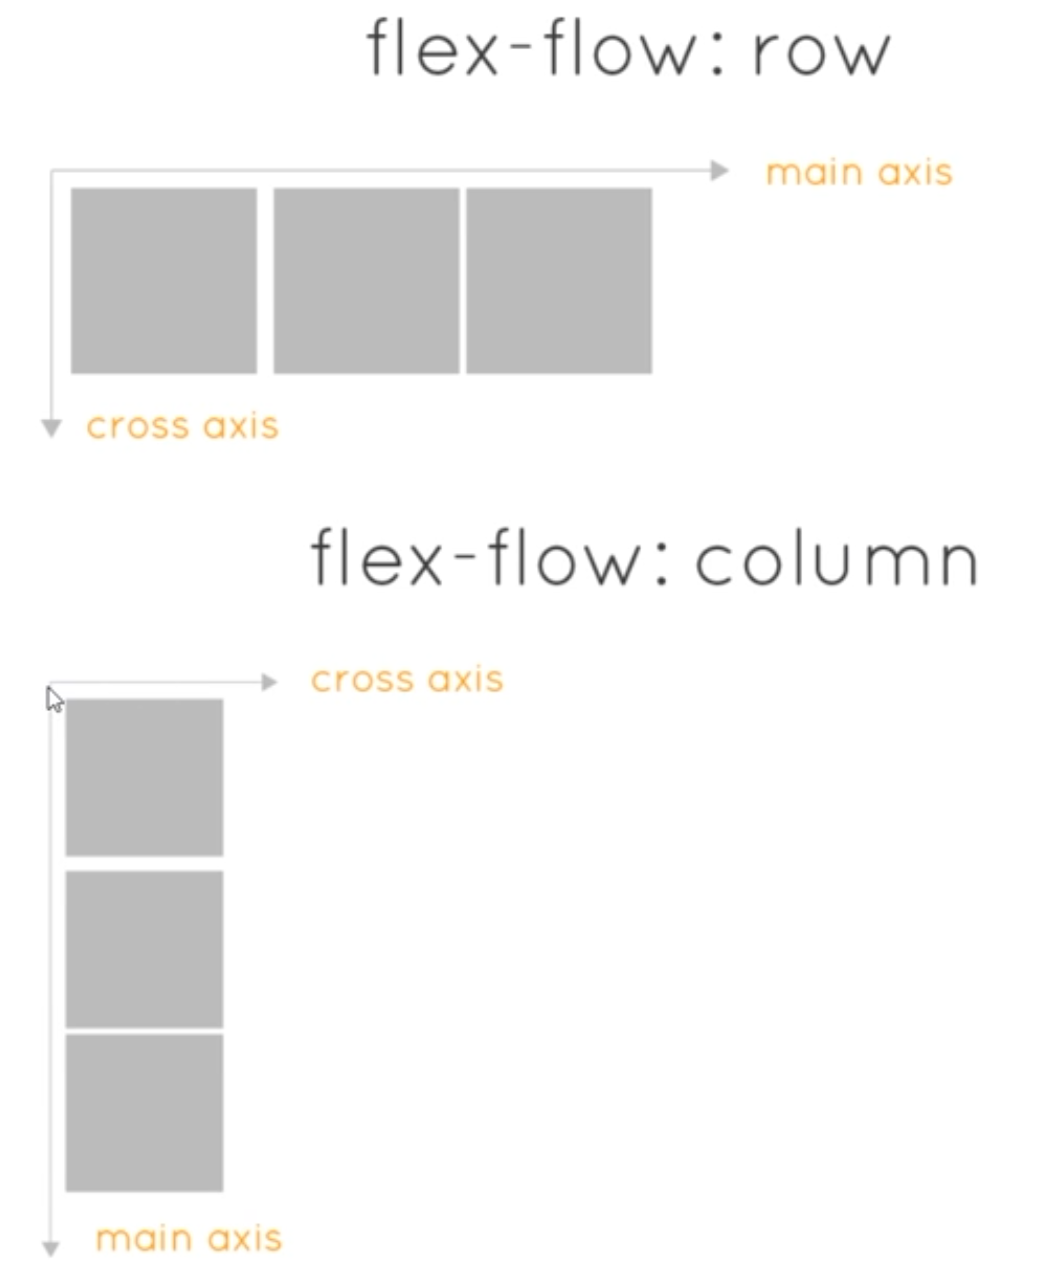 flex axis - main axis and cross axis for Row and Column